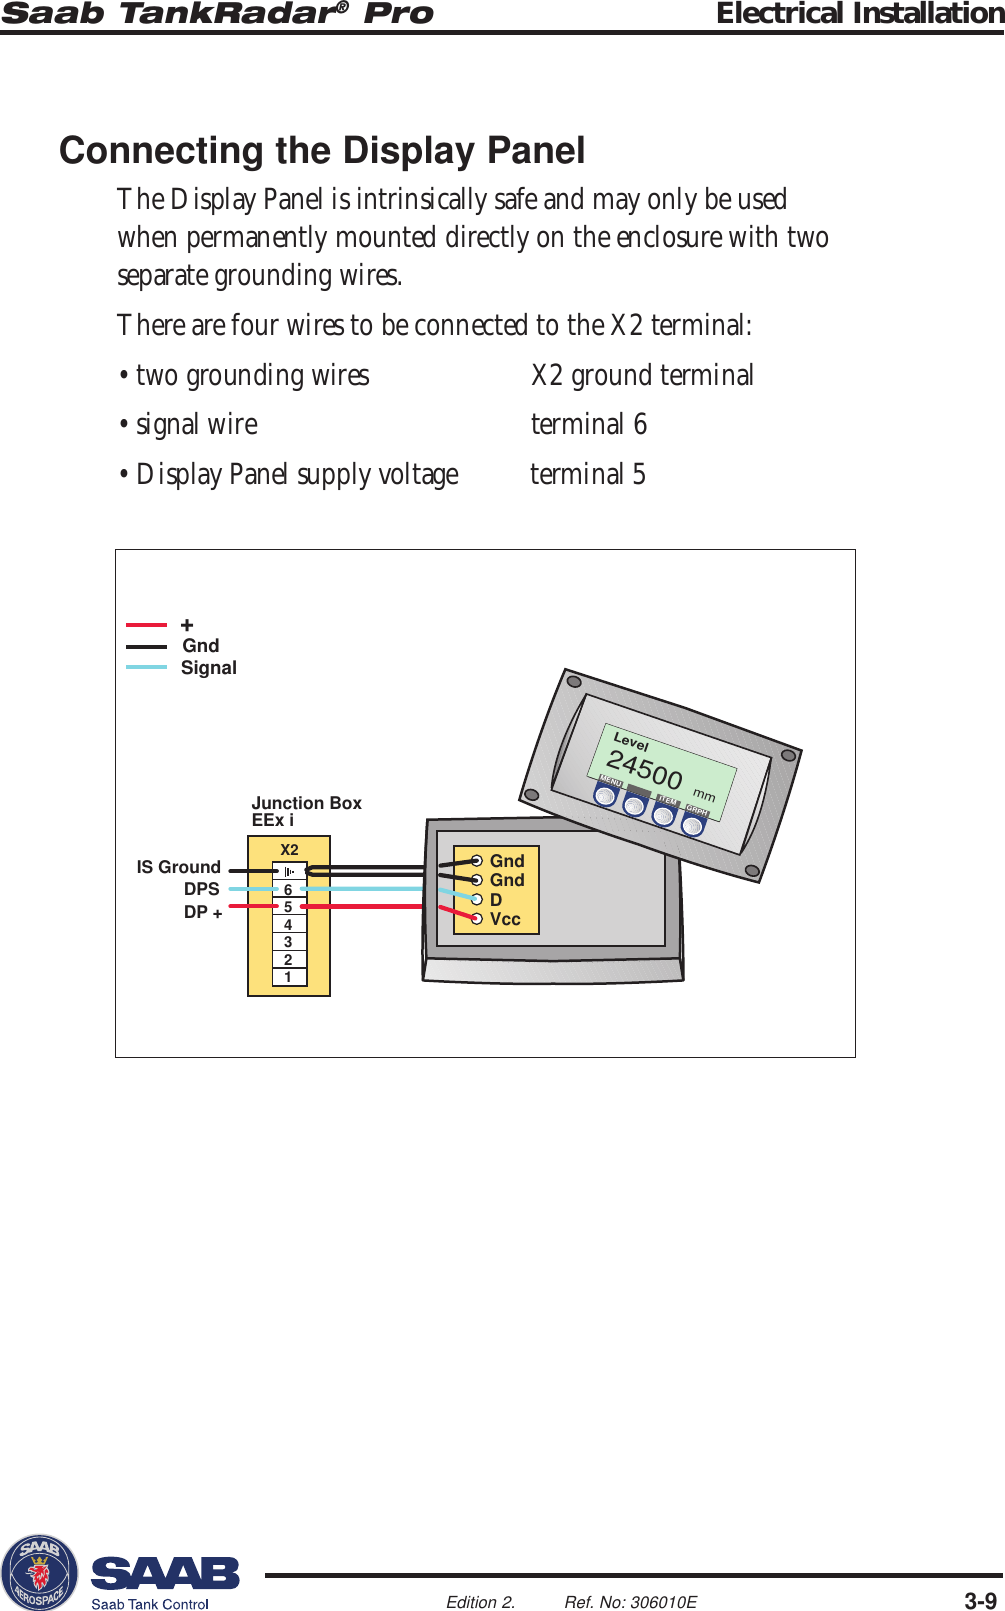 Saab TankRadar® Pro Electrical Installation3-9Edition 2. Ref. No: 306010EGndGndDVccLevel24500MENU ITEM GRPHmmJunction BoxEEx i654321X2IS GroundDPSDP ++GndSignalConnecting the Display PanelThe Display Panel is intrinsically safe and may only be usedwhen permanently mounted directly on the enclosure with twoseparate grounding wires.There are four wires to be connected to the X2 terminal:• two grounding wires X2 ground terminal• signal wire terminal 6• Display Panel supply voltage terminal 5